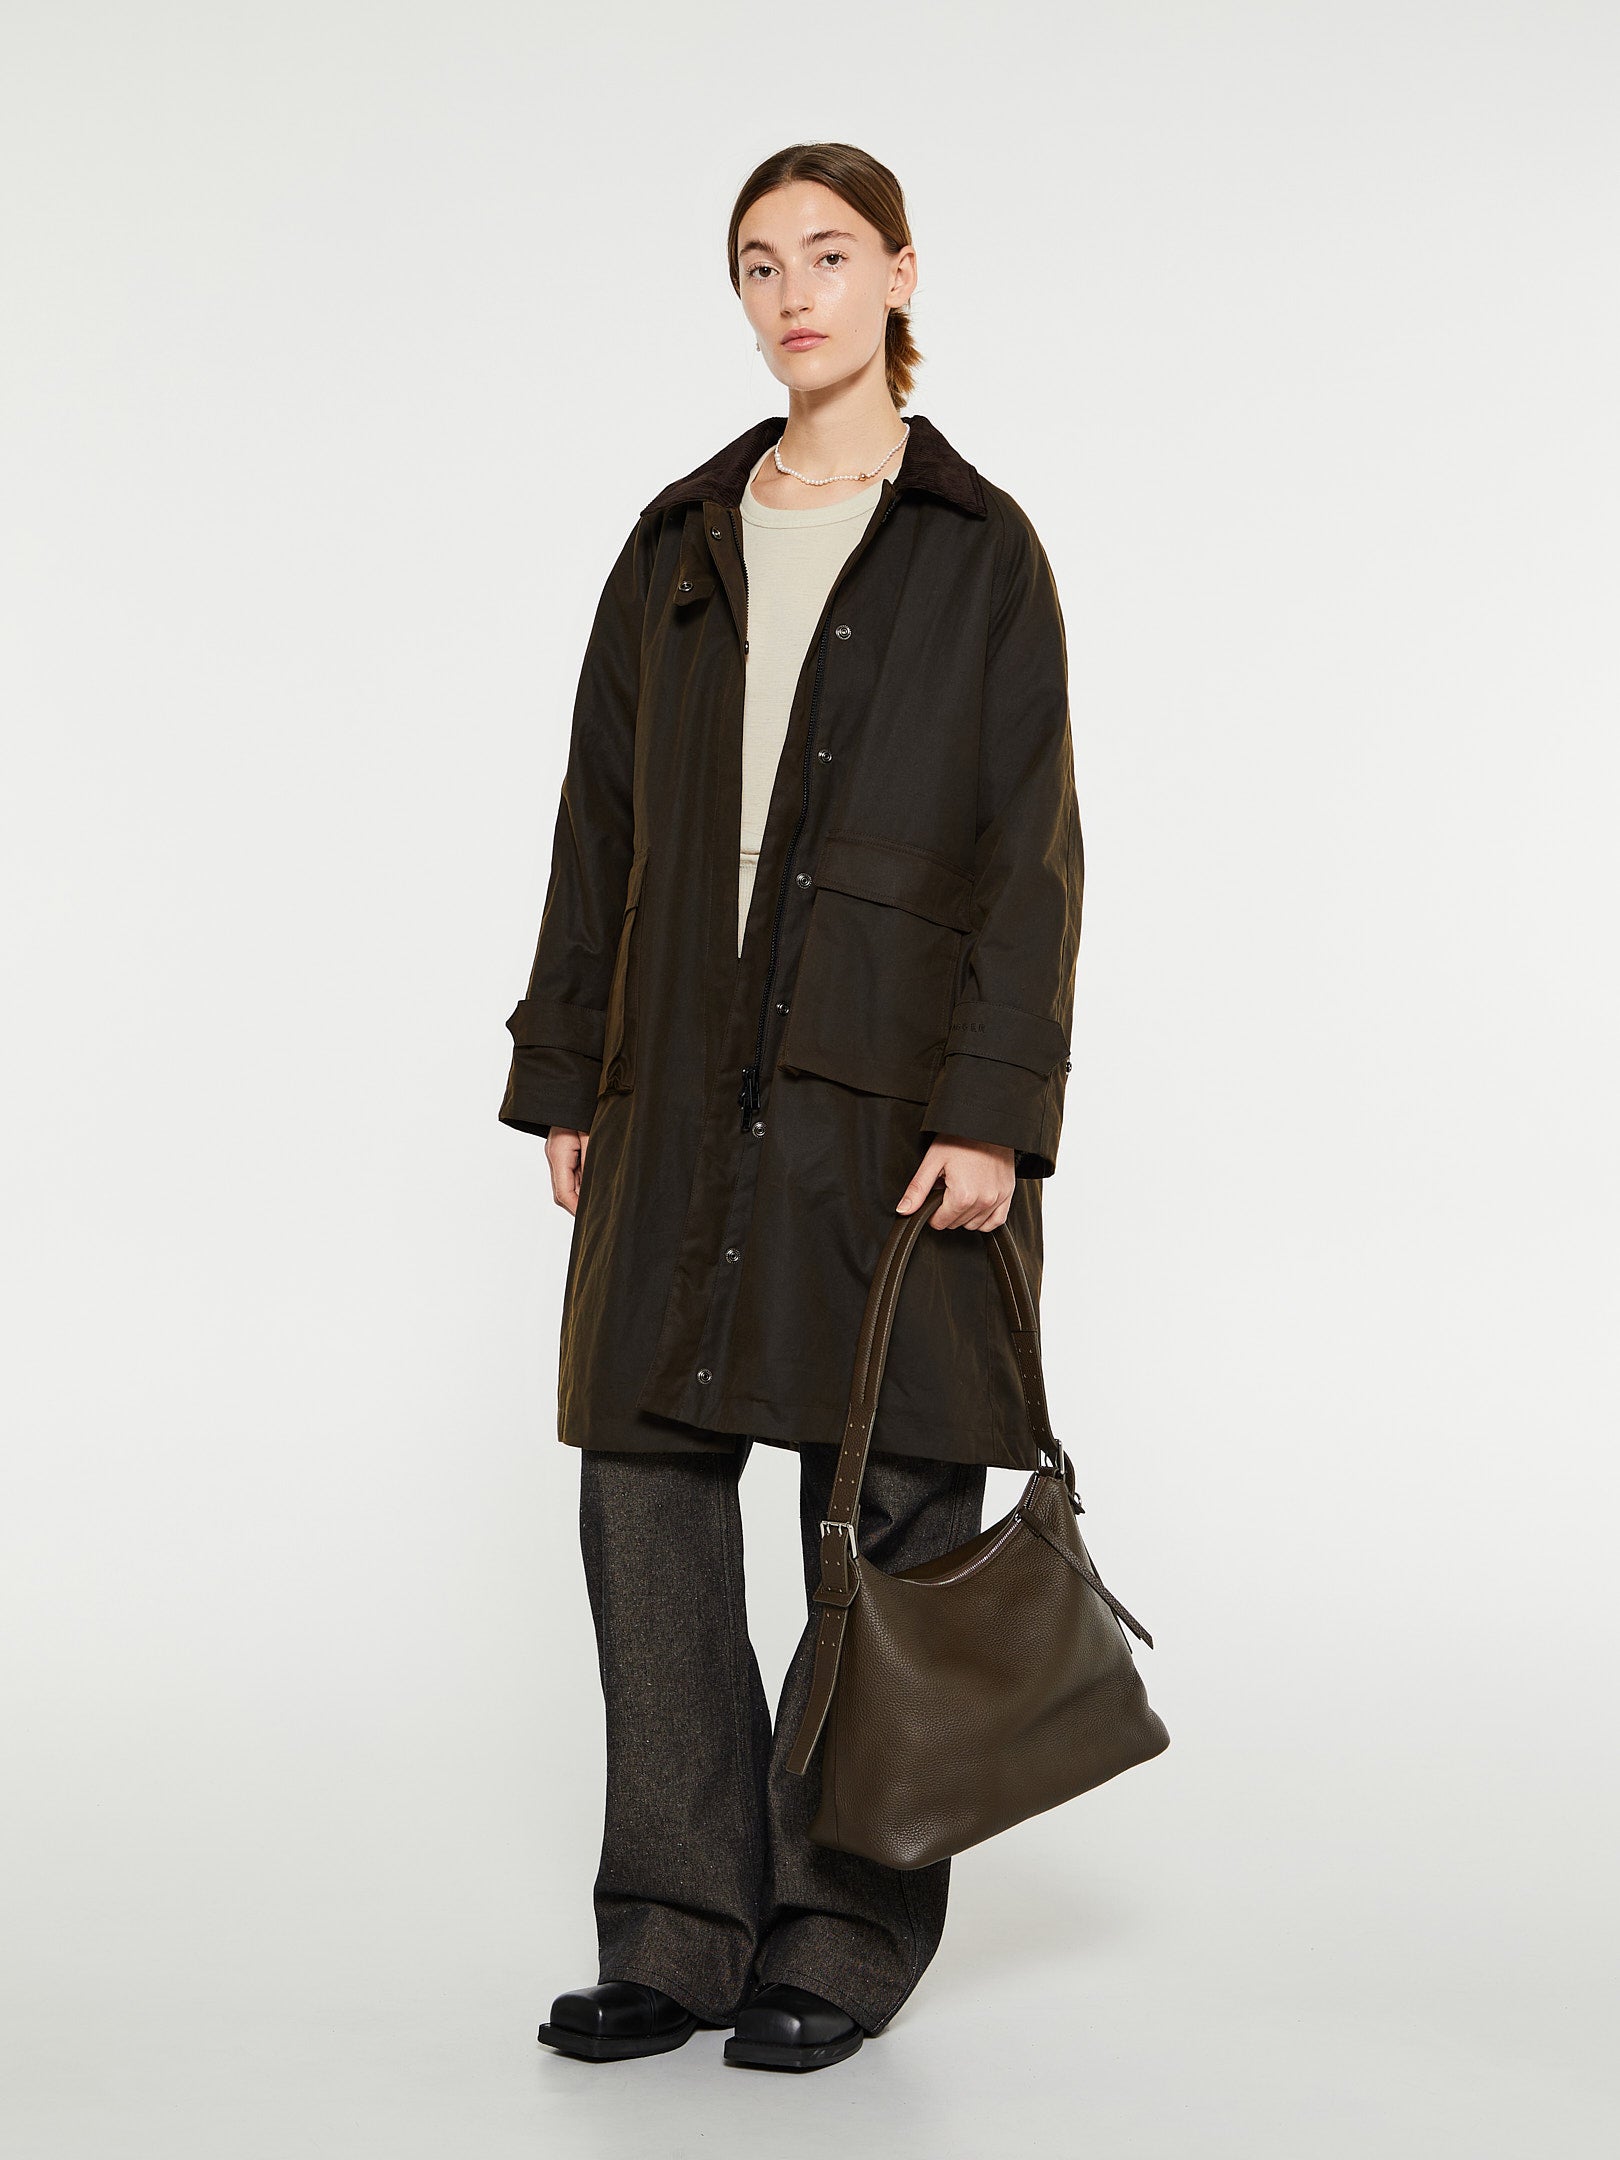 Coats & Jackets for Shop | the stoy selection women at